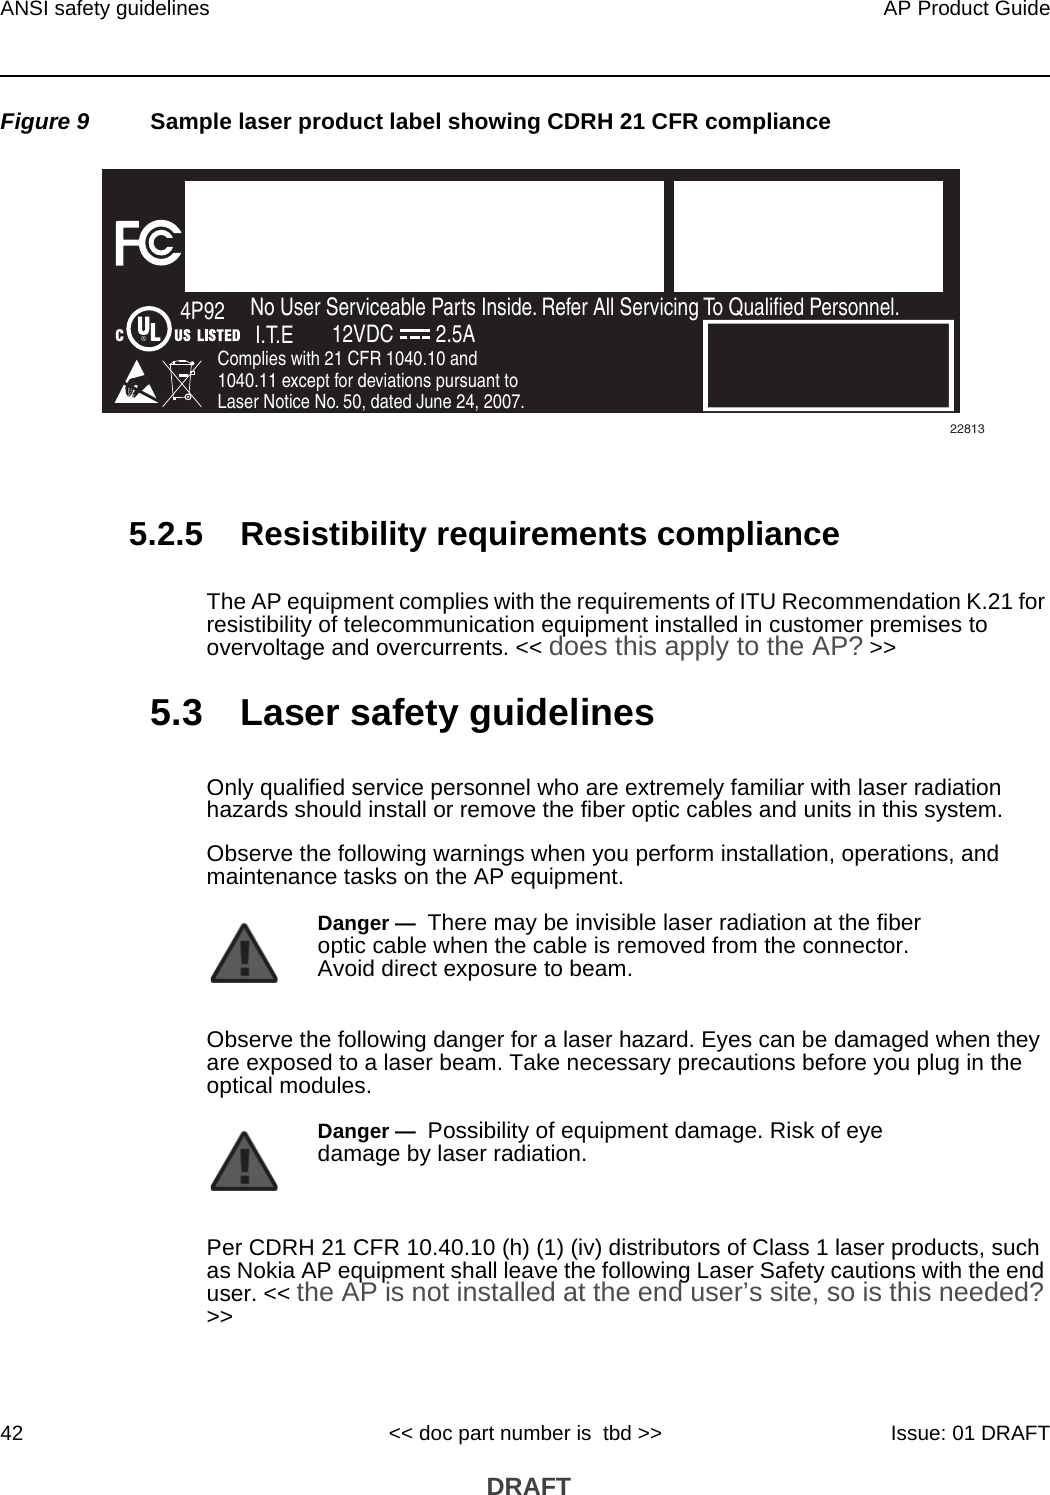 ANSI safety guidelines42AP Product Guide&lt;&lt; doc part number is  tbd &gt;&gt; Issue: 01 DRAFT DRAFTFigure 9 Sample laser product label showing CDRH 21 CFR compliance5.2.5 Resistibility requirements complianceThe AP equipment complies with the requirements of ITU Recommendation K.21 for resistibility of telecommunication equipment installed in customer premises to overvoltage and overcurrents. &lt;&lt; does this apply to the AP? &gt;&gt;5.3 Laser safety guidelinesOnly qualified service personnel who are extremely familiar with laser radiation hazards should install or remove the fiber optic cables and units in this system.Observe the following warnings when you perform installation, operations, and maintenance tasks on the AP equipment.Observe the following danger for a laser hazard. Eyes can be damaged when they are exposed to a laser beam. Take necessary precautions before you plug in the optical modules.Per CDRH 21 CFR 10.40.10 (h) (1) (iv) distributors of Class 1 laser products, such as Nokia AP equipment shall leave the following Laser Safety cautions with the end user. &lt;&lt; the AP is not installed at the end user’s site, so is this needed? &gt;&gt;FiOS EnabledTo Order FiOS: 888 GET-FiOSor visit Verizon.comFor Service: 888 553-15552301 Sugar Bush Rd.Raleigh, NC 27612No User Serviceable Parts Inside. Refer All Servicing To Qualified Personnel.Complies with 21 CFR 1040.10 and 1040.11 except for deviations pursuant to Laser Notice No. 50, dated June 24, 2007.4P92I.T.E 12VDC 2.5A22813Danger —  There may be invisible laser radiation at the fiber optic cable when the cable is removed from the connector. Avoid direct exposure to beam.Danger —  Possibility of equipment damage. Risk of eye damage by laser radiation.